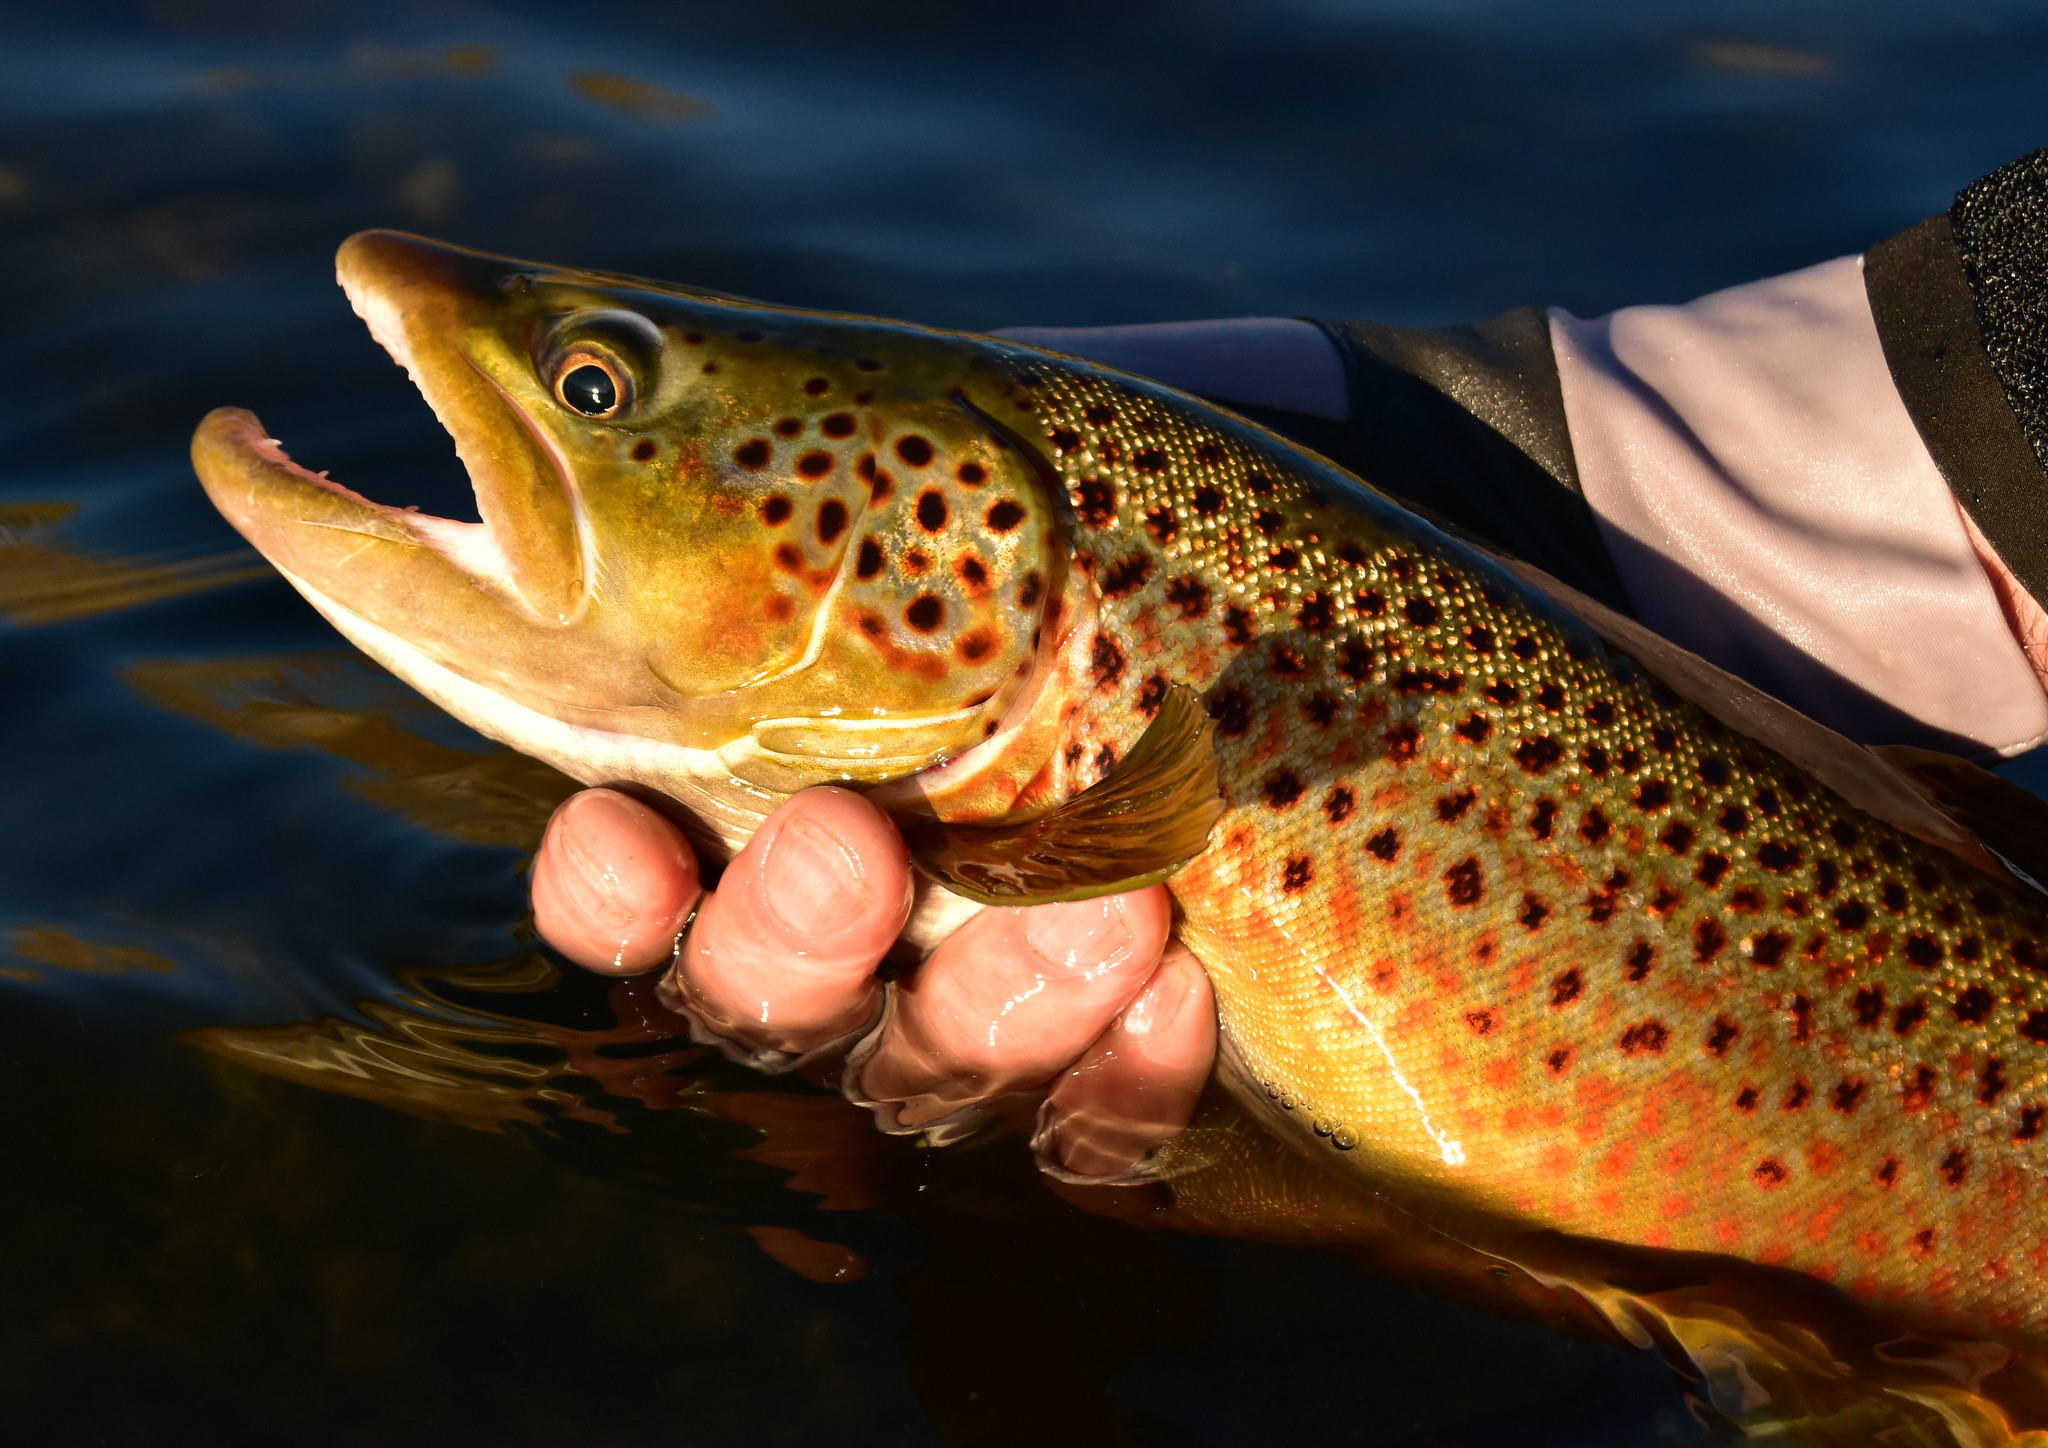 A close-up photo of a person's hand holding a brown trout. The front half of the brown trout is visible, with the second half of the trout going out of the image. The trout is brightly colored with hues of gold and green sprinkled with black and orange spots.